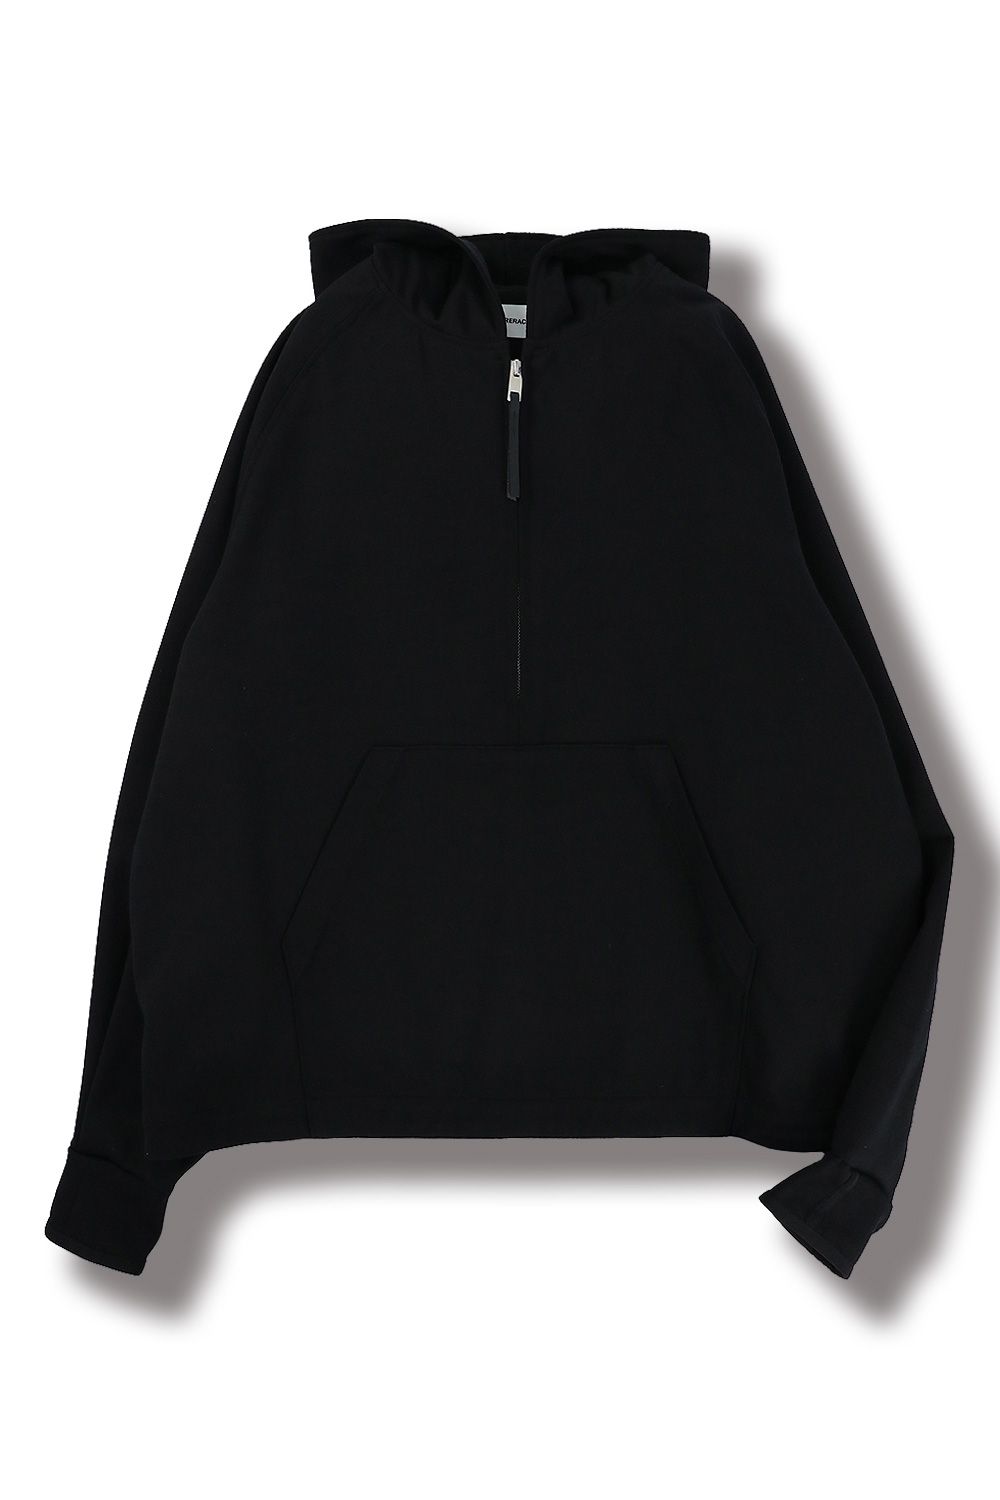 THE RERACS - 【23AW】RERACS HALF ZIP HOODED PULLOVER(BLACK/WOOLY